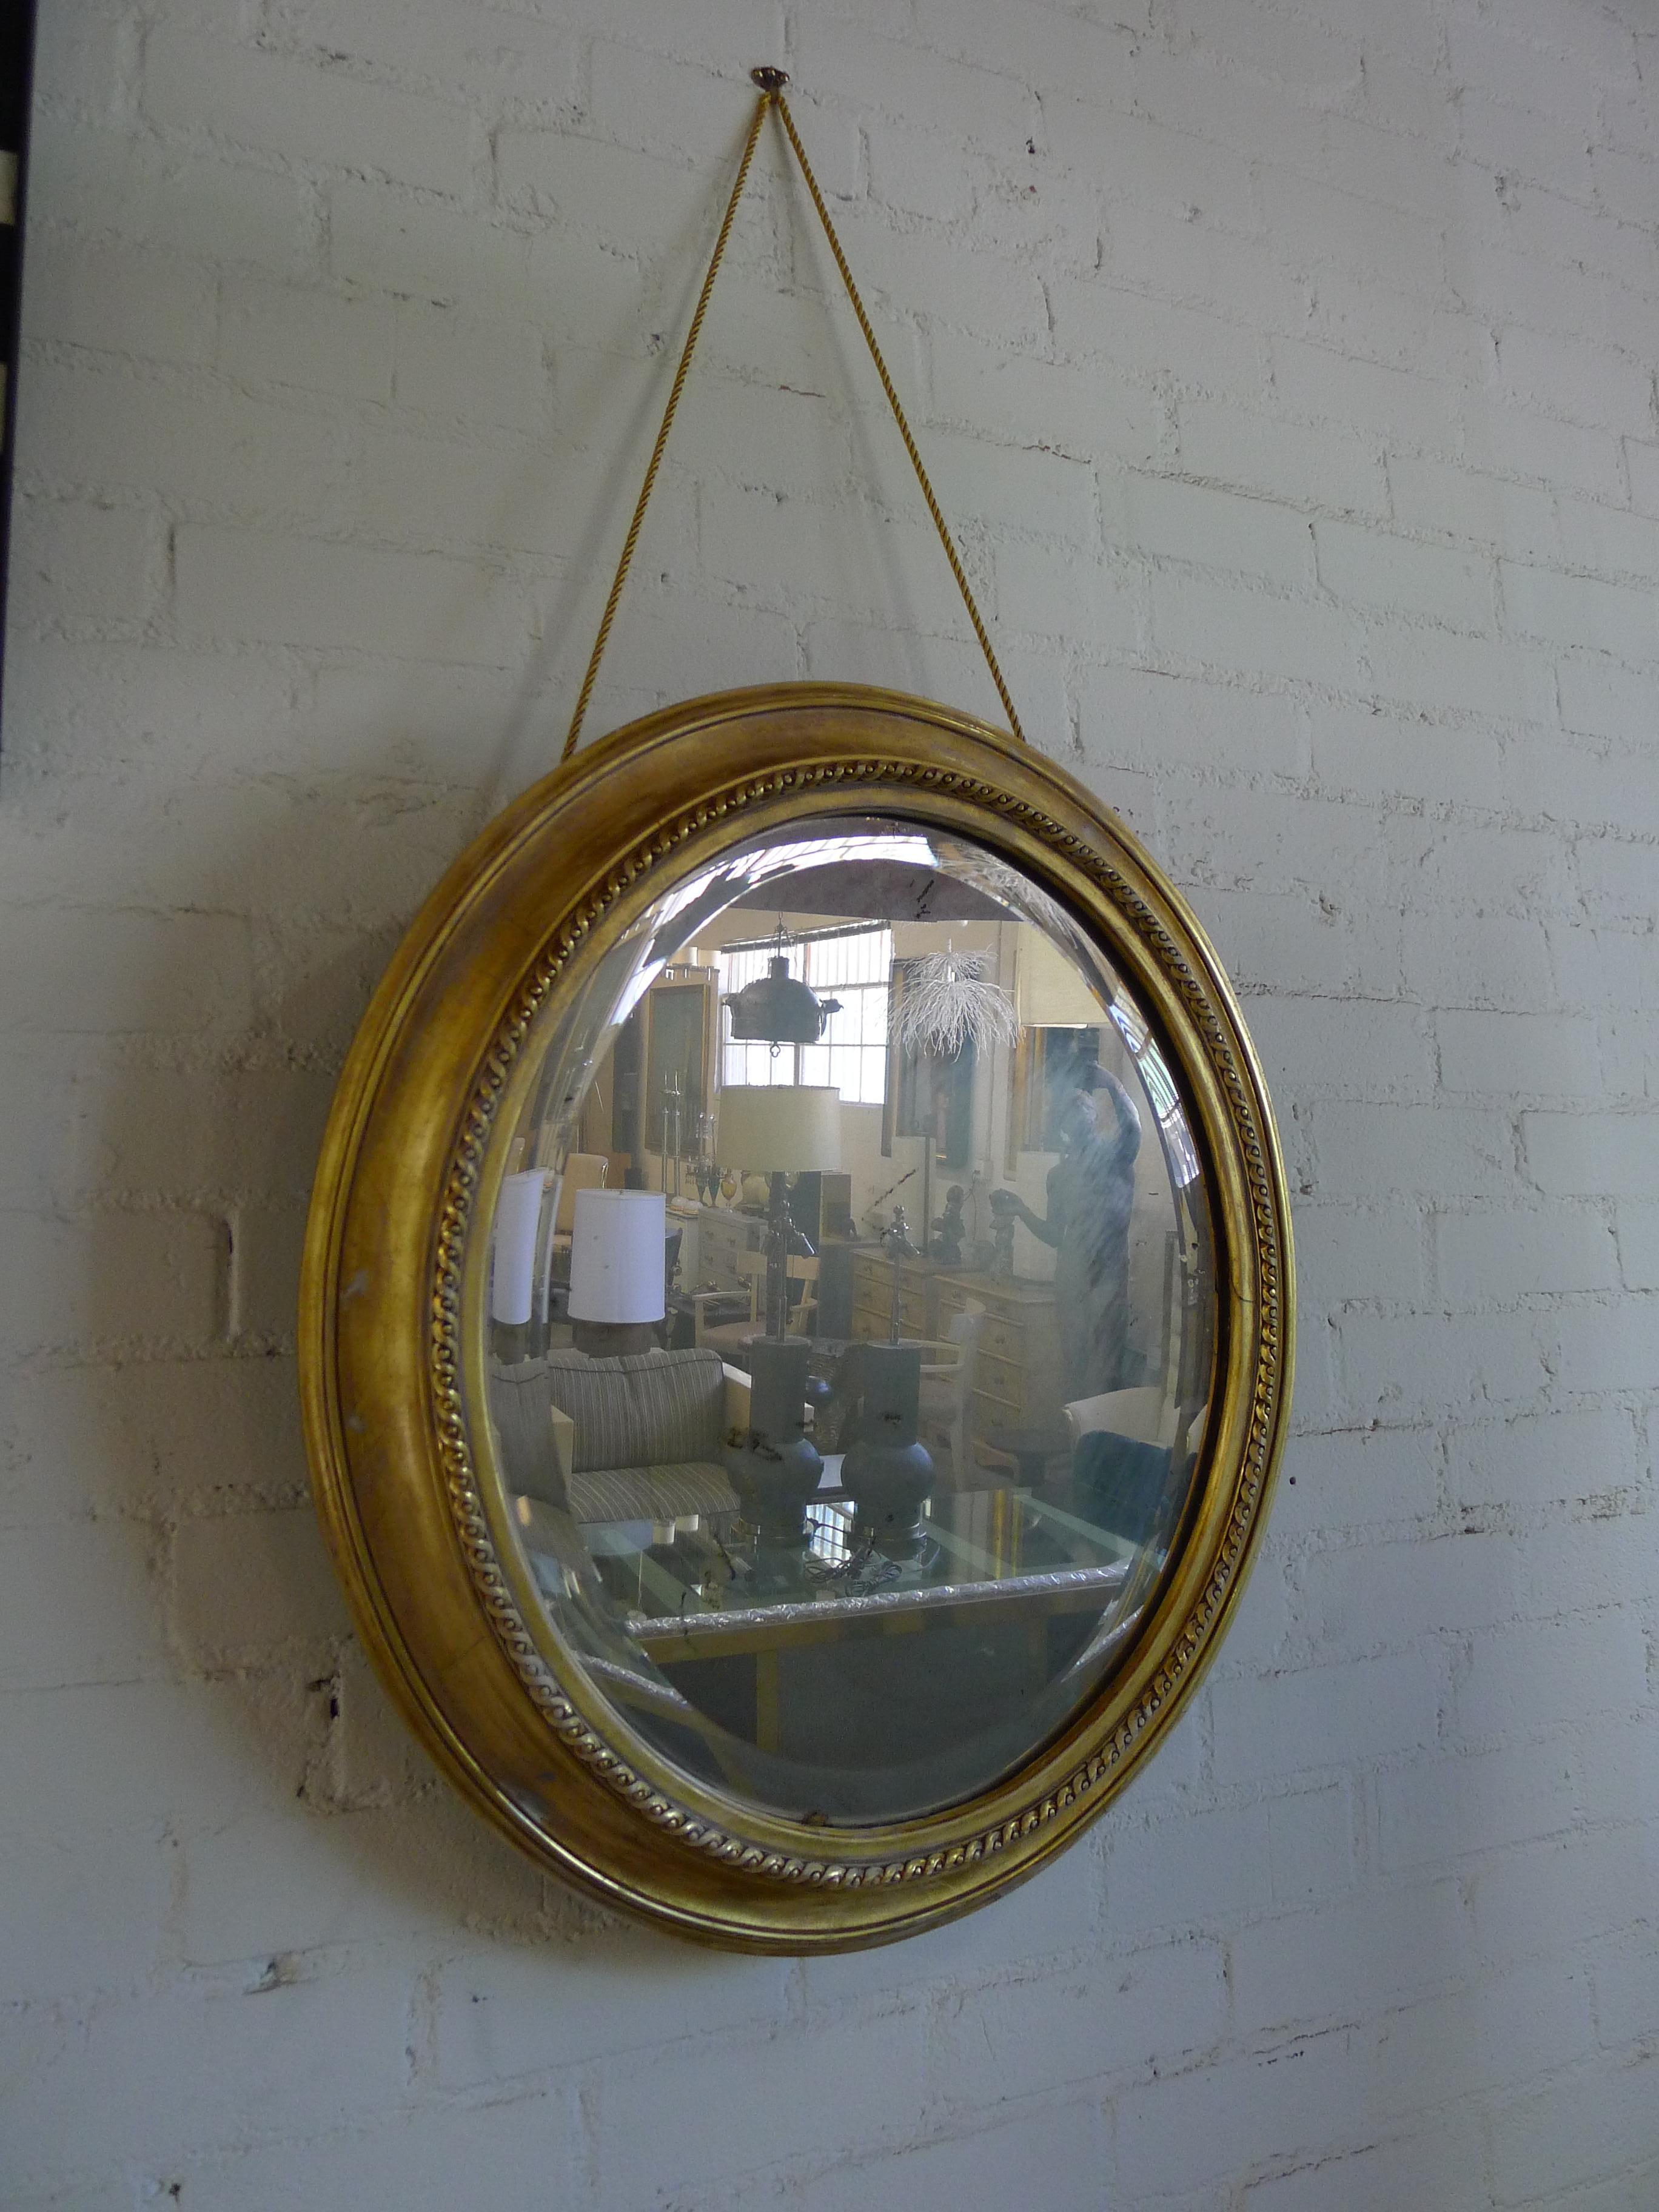 Oval gilded mirror in a classic antique style, with new distressing, new rope and new 22K gold finishes for the frame. Mirror is antiqued see all imaging. Hung by rope.

The wood frame has age marks and cracklature throughout, indicative of the